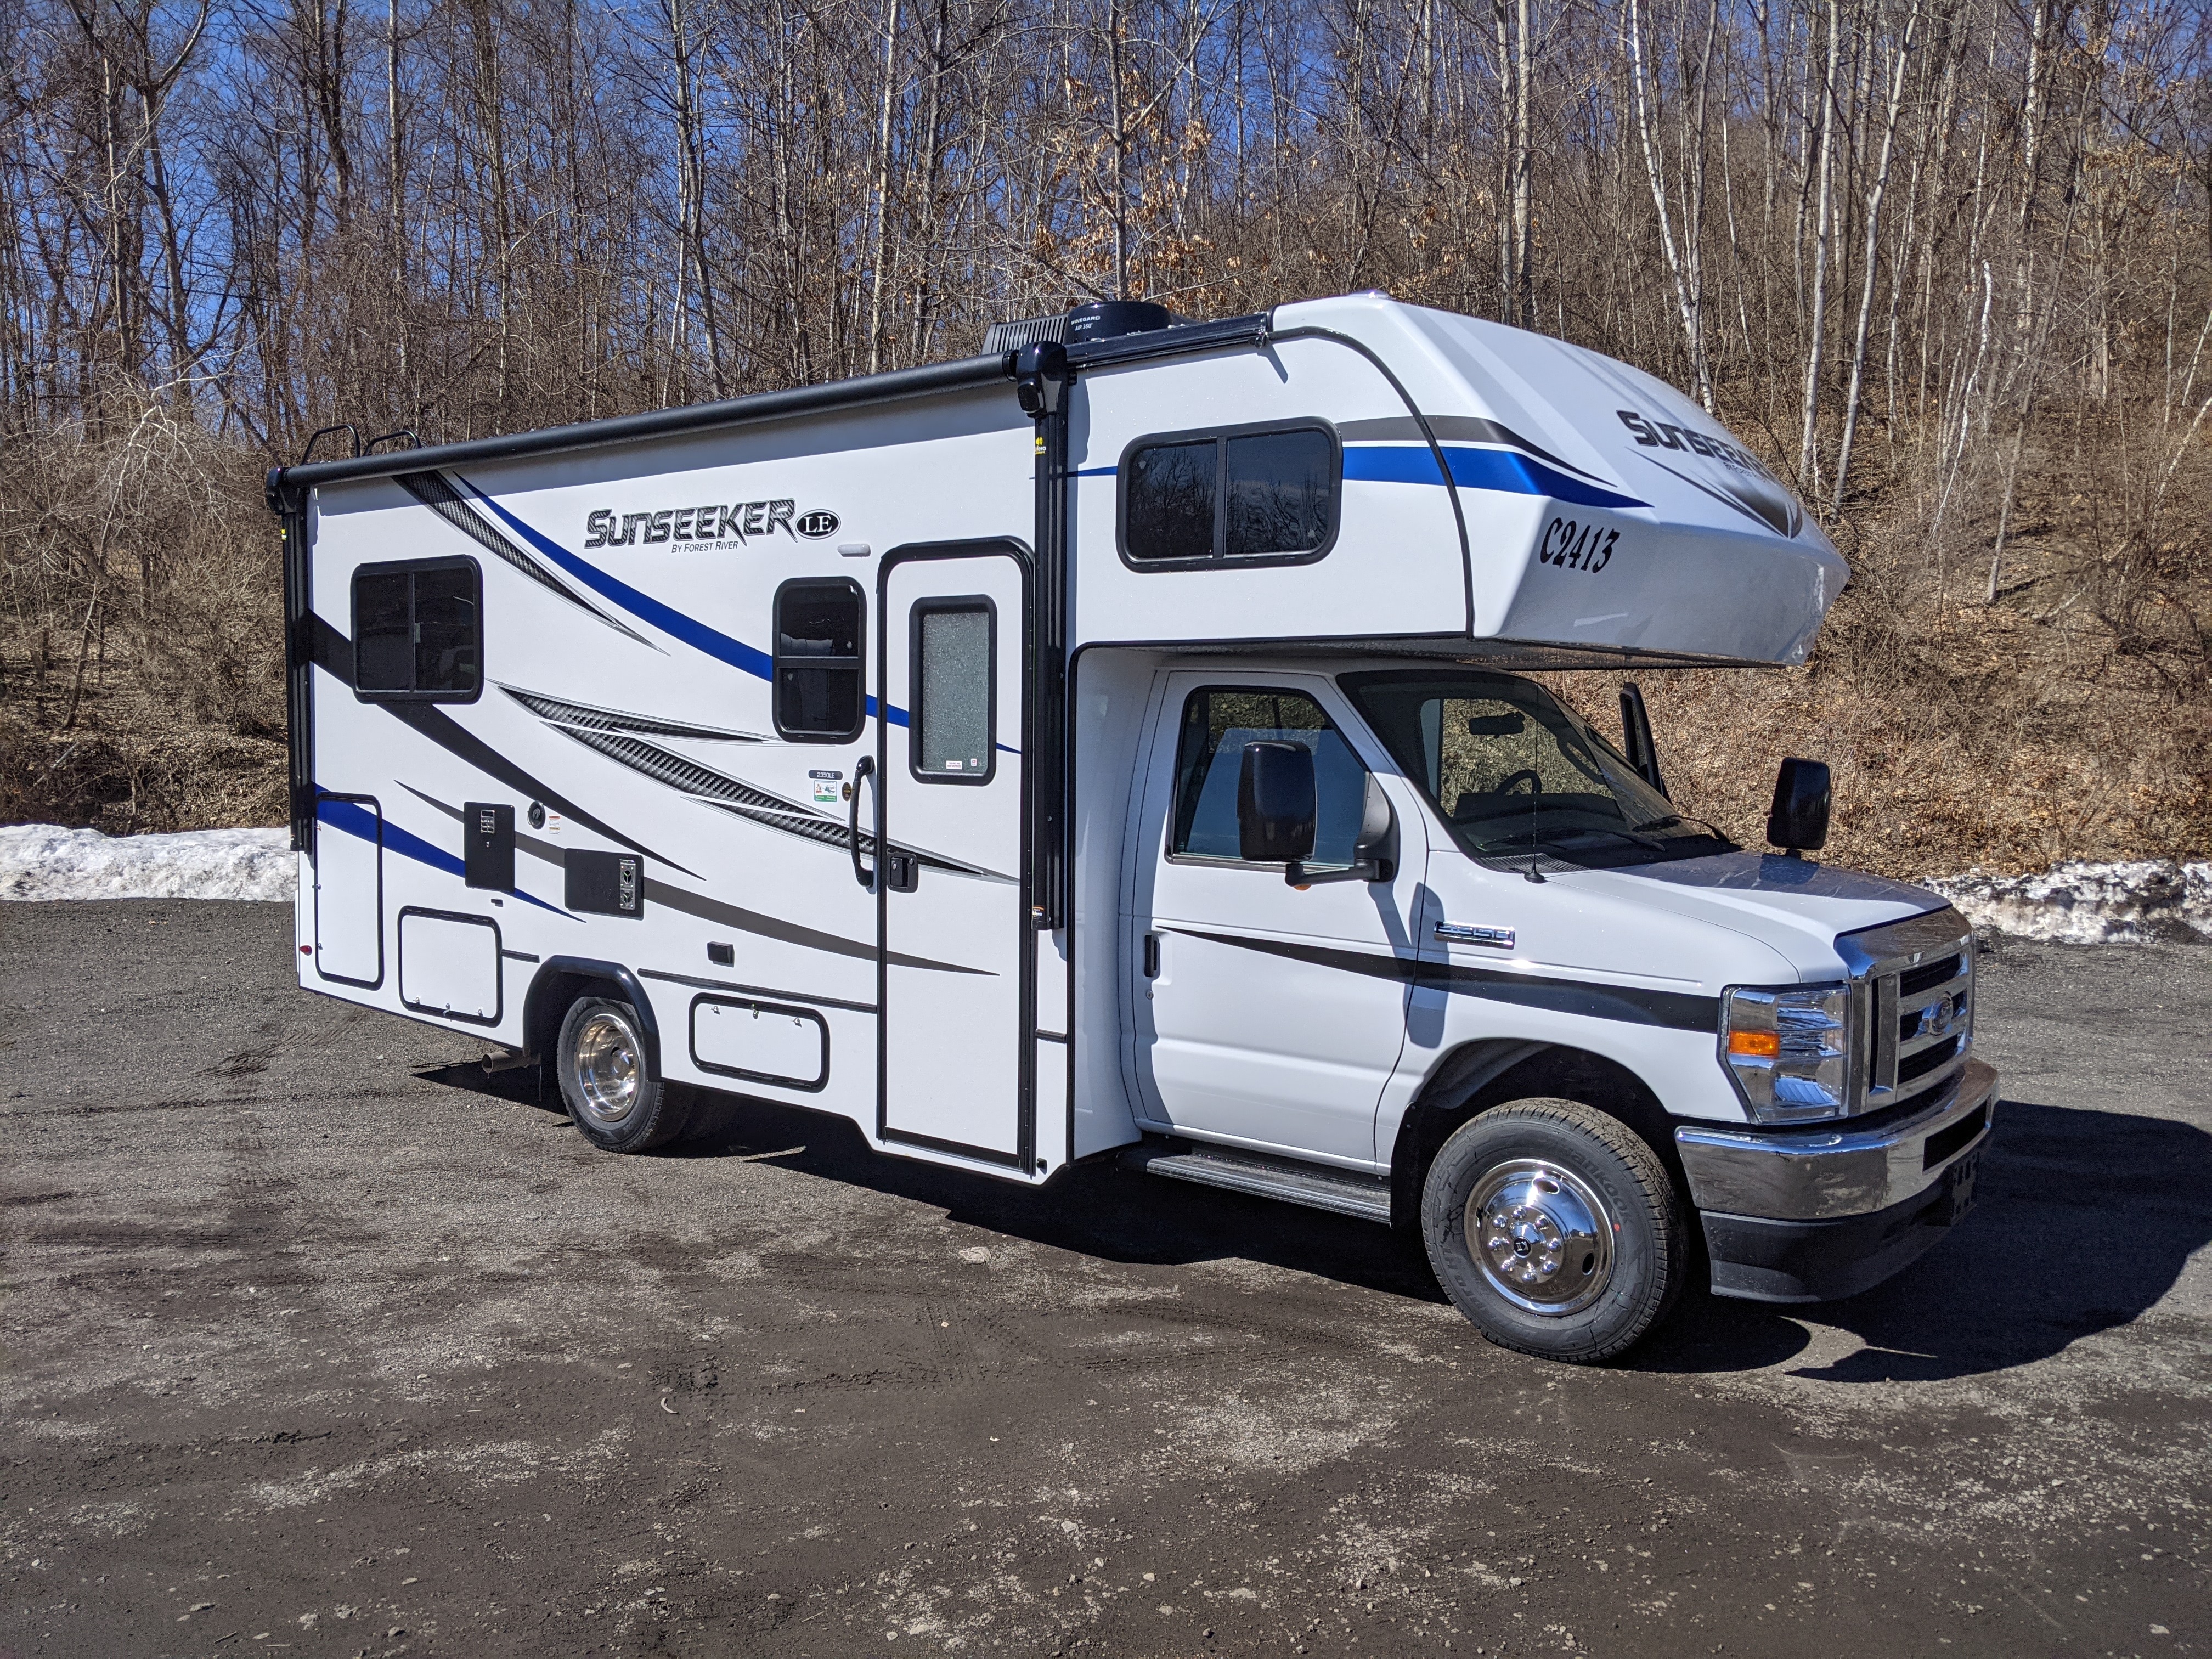 24' Class C Motorhome for Rental at 84 RV Rentals